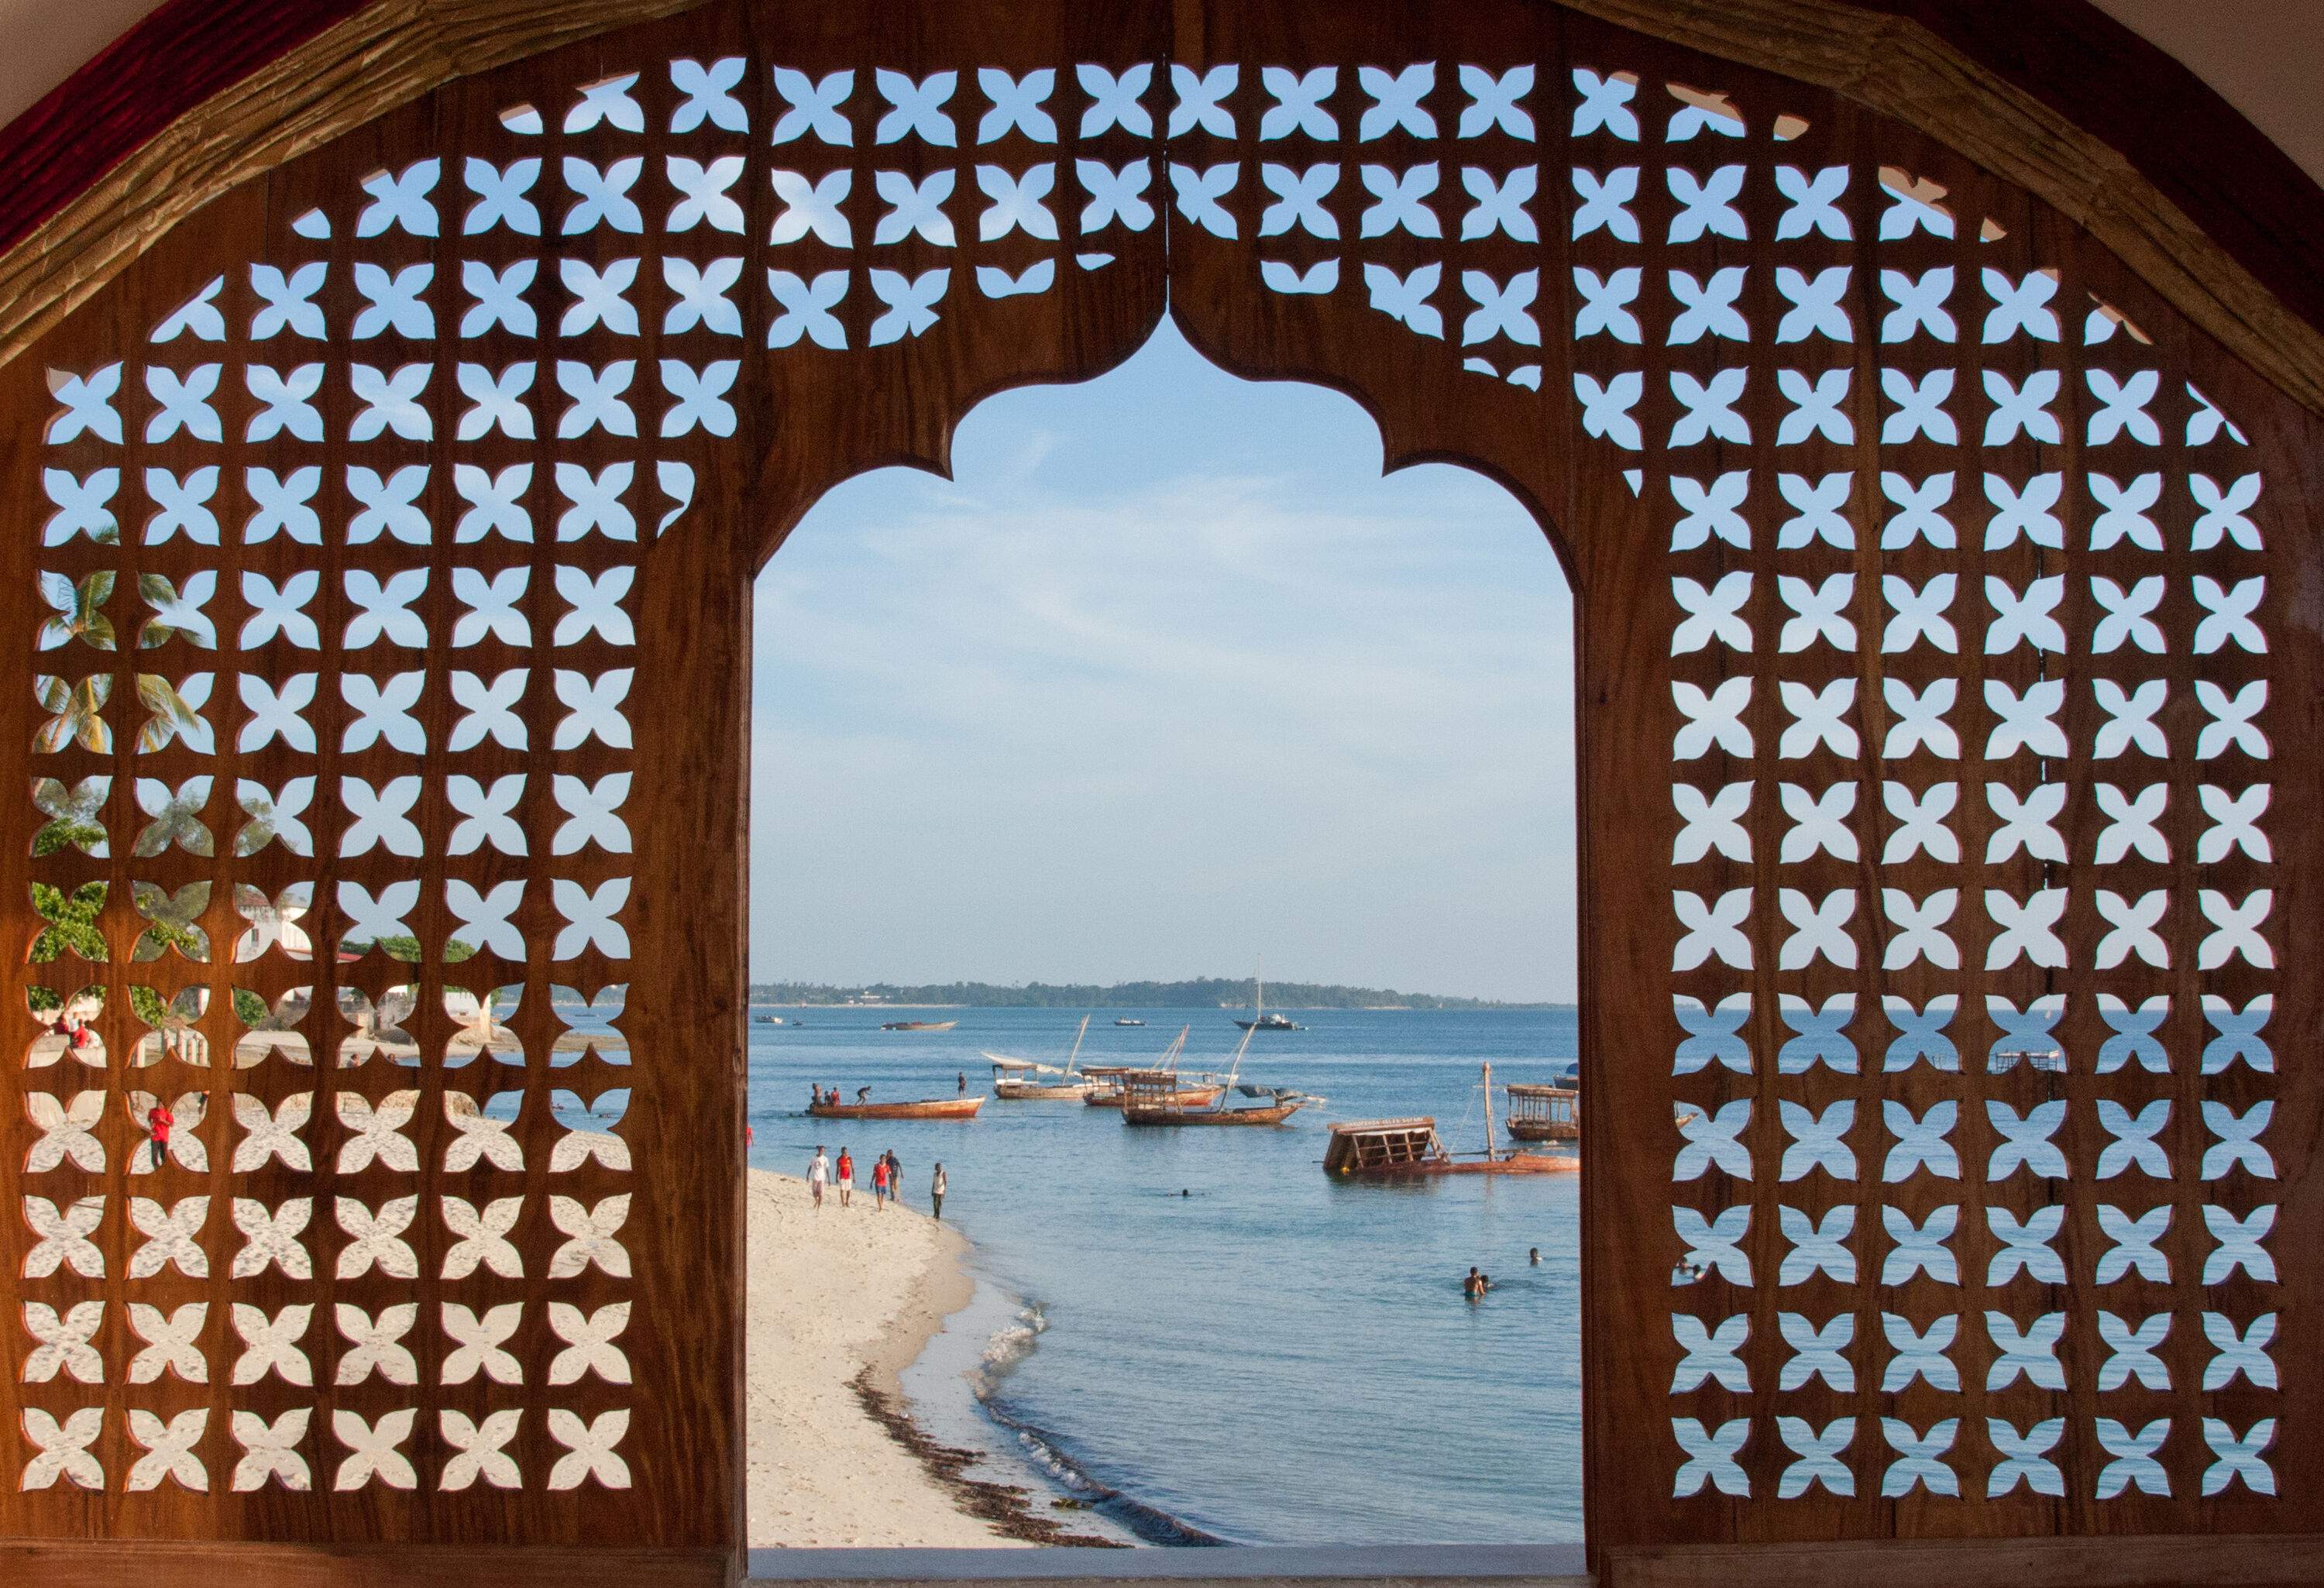 A tranquil beach lined with moored boats, viewed through a latticework window of a hotel.